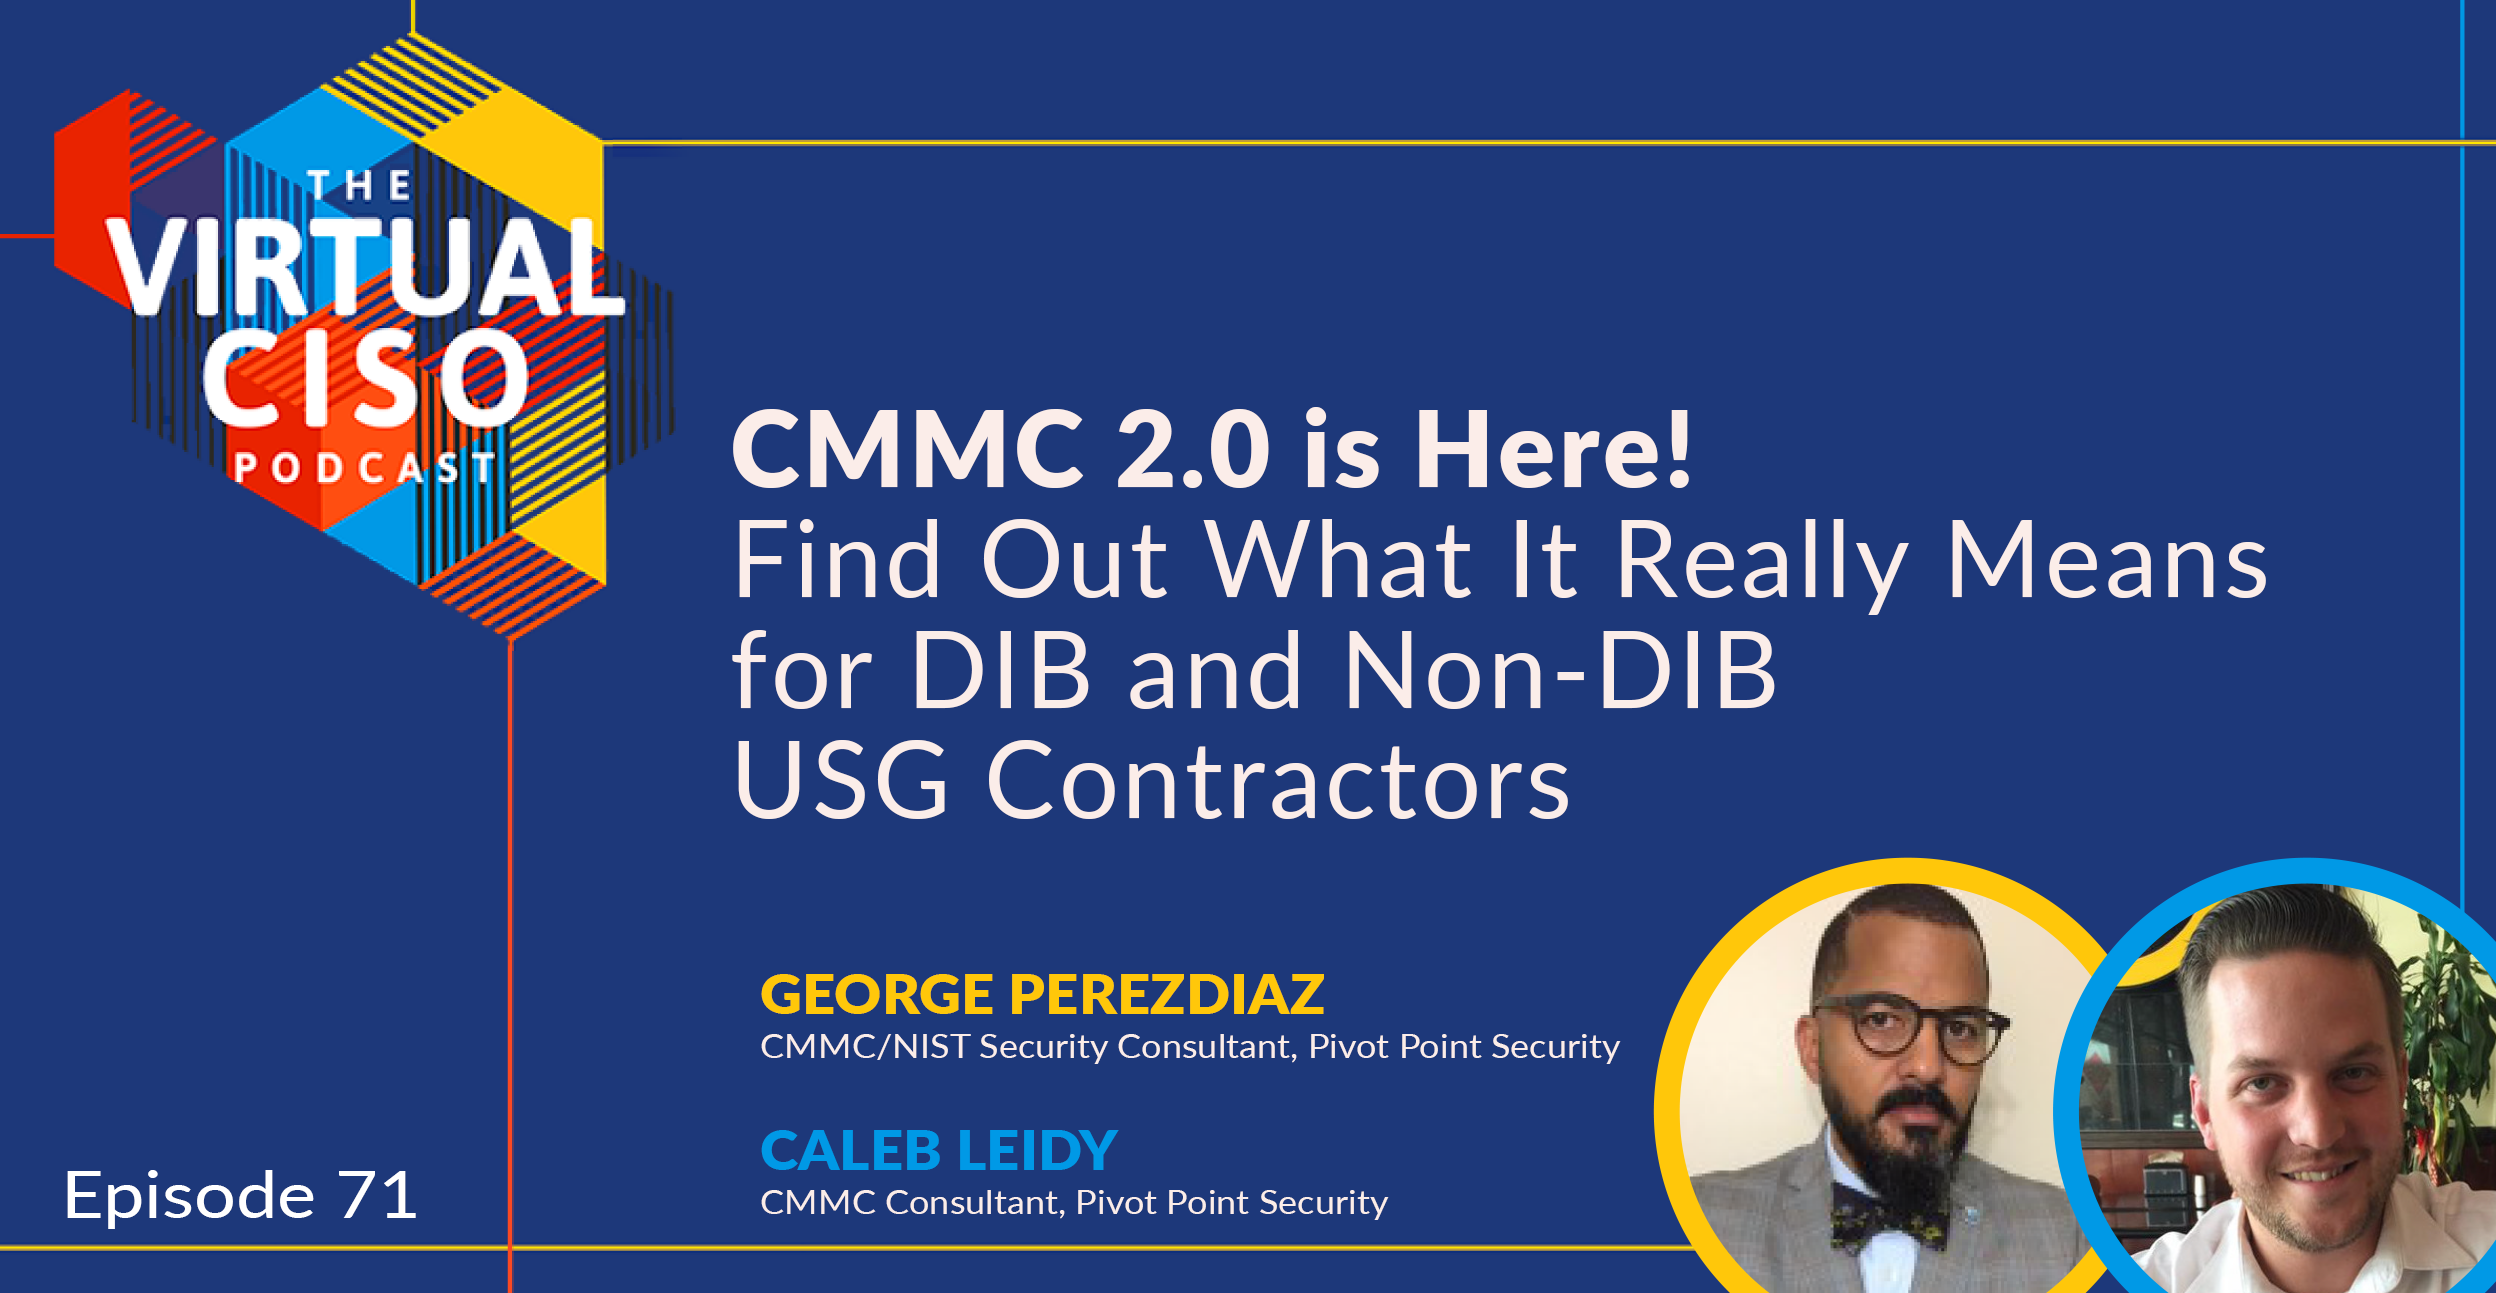 EP#71 – Caleb Leidy & George Perezdiaz – CMMC 2.0 is Here! Find Out What It Really Means for DIB and Non-DIB USG Contractors